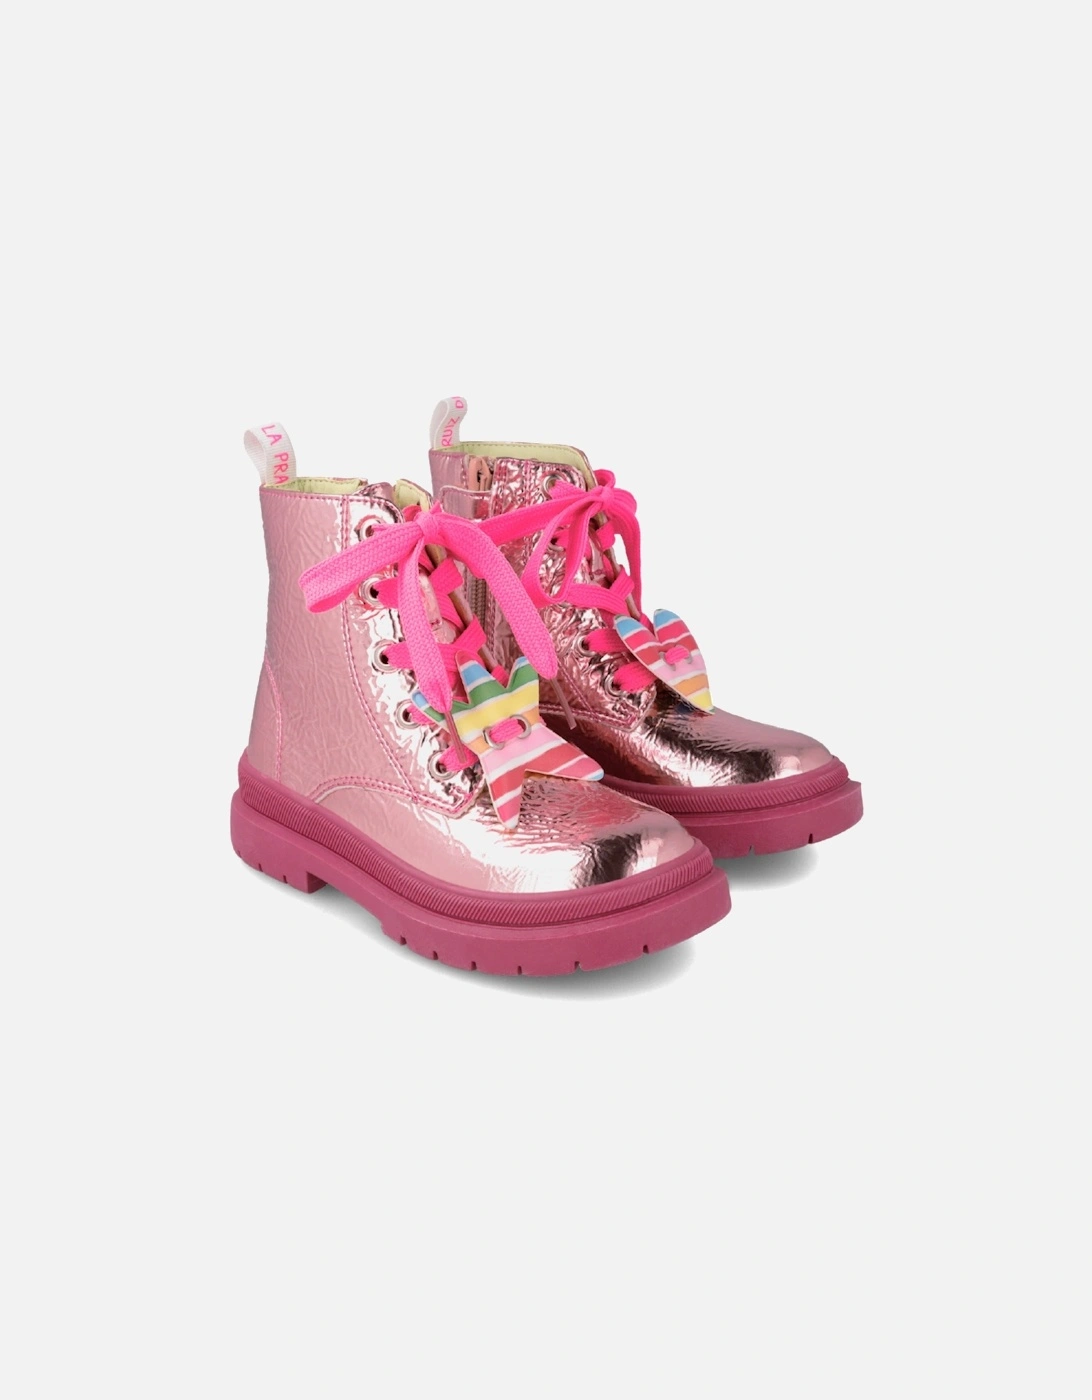 Pink Iridescent Lace Up Boots